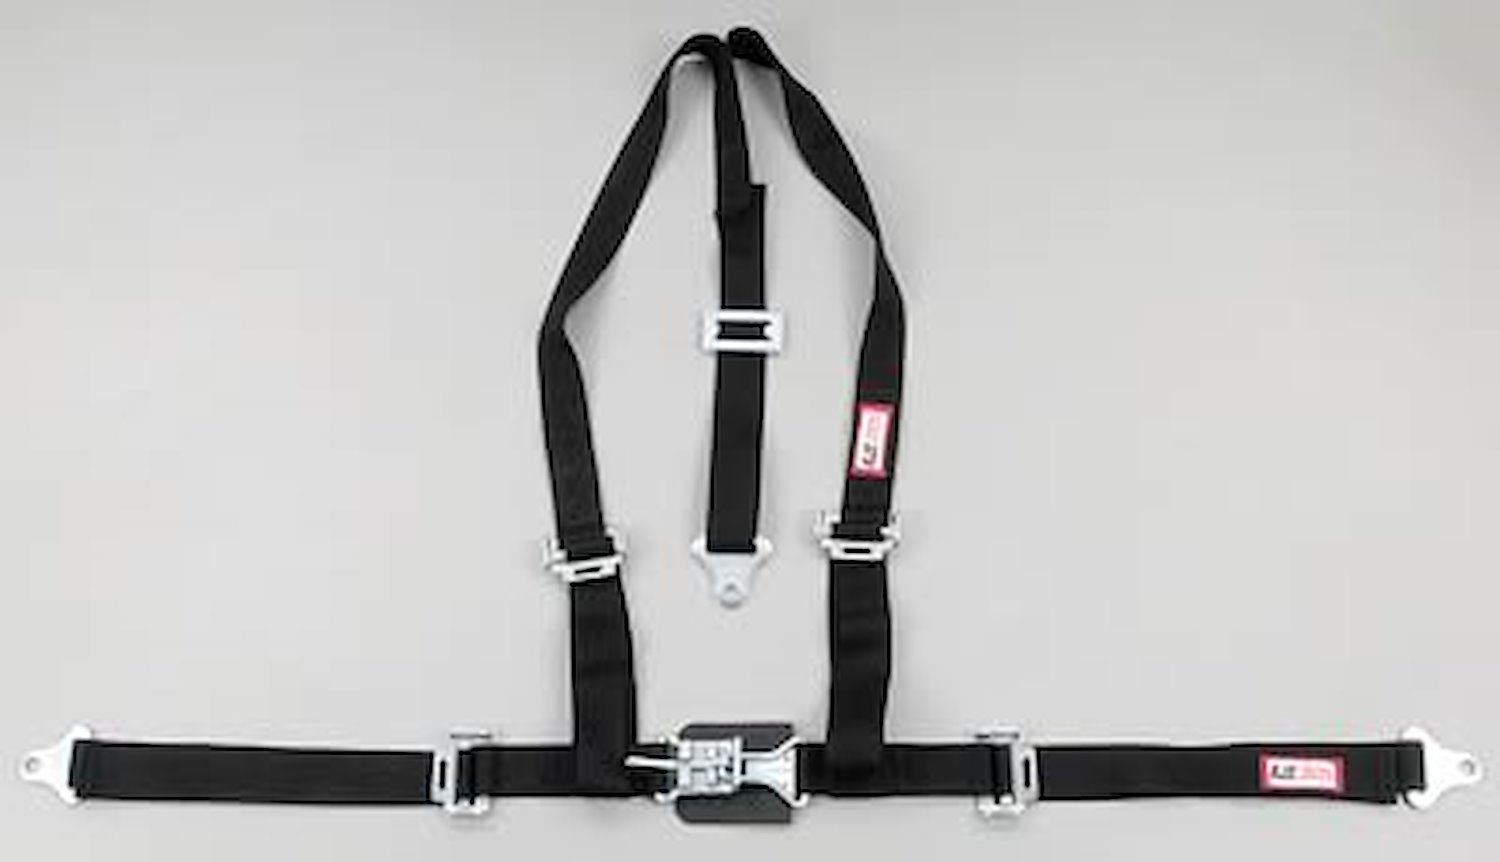 NON-SFI L&L HARNESS 3 PULL UP Lap Belt w/adjuster 2 S.H. Y FLOOR Mount ALL WRAP ENDS RED